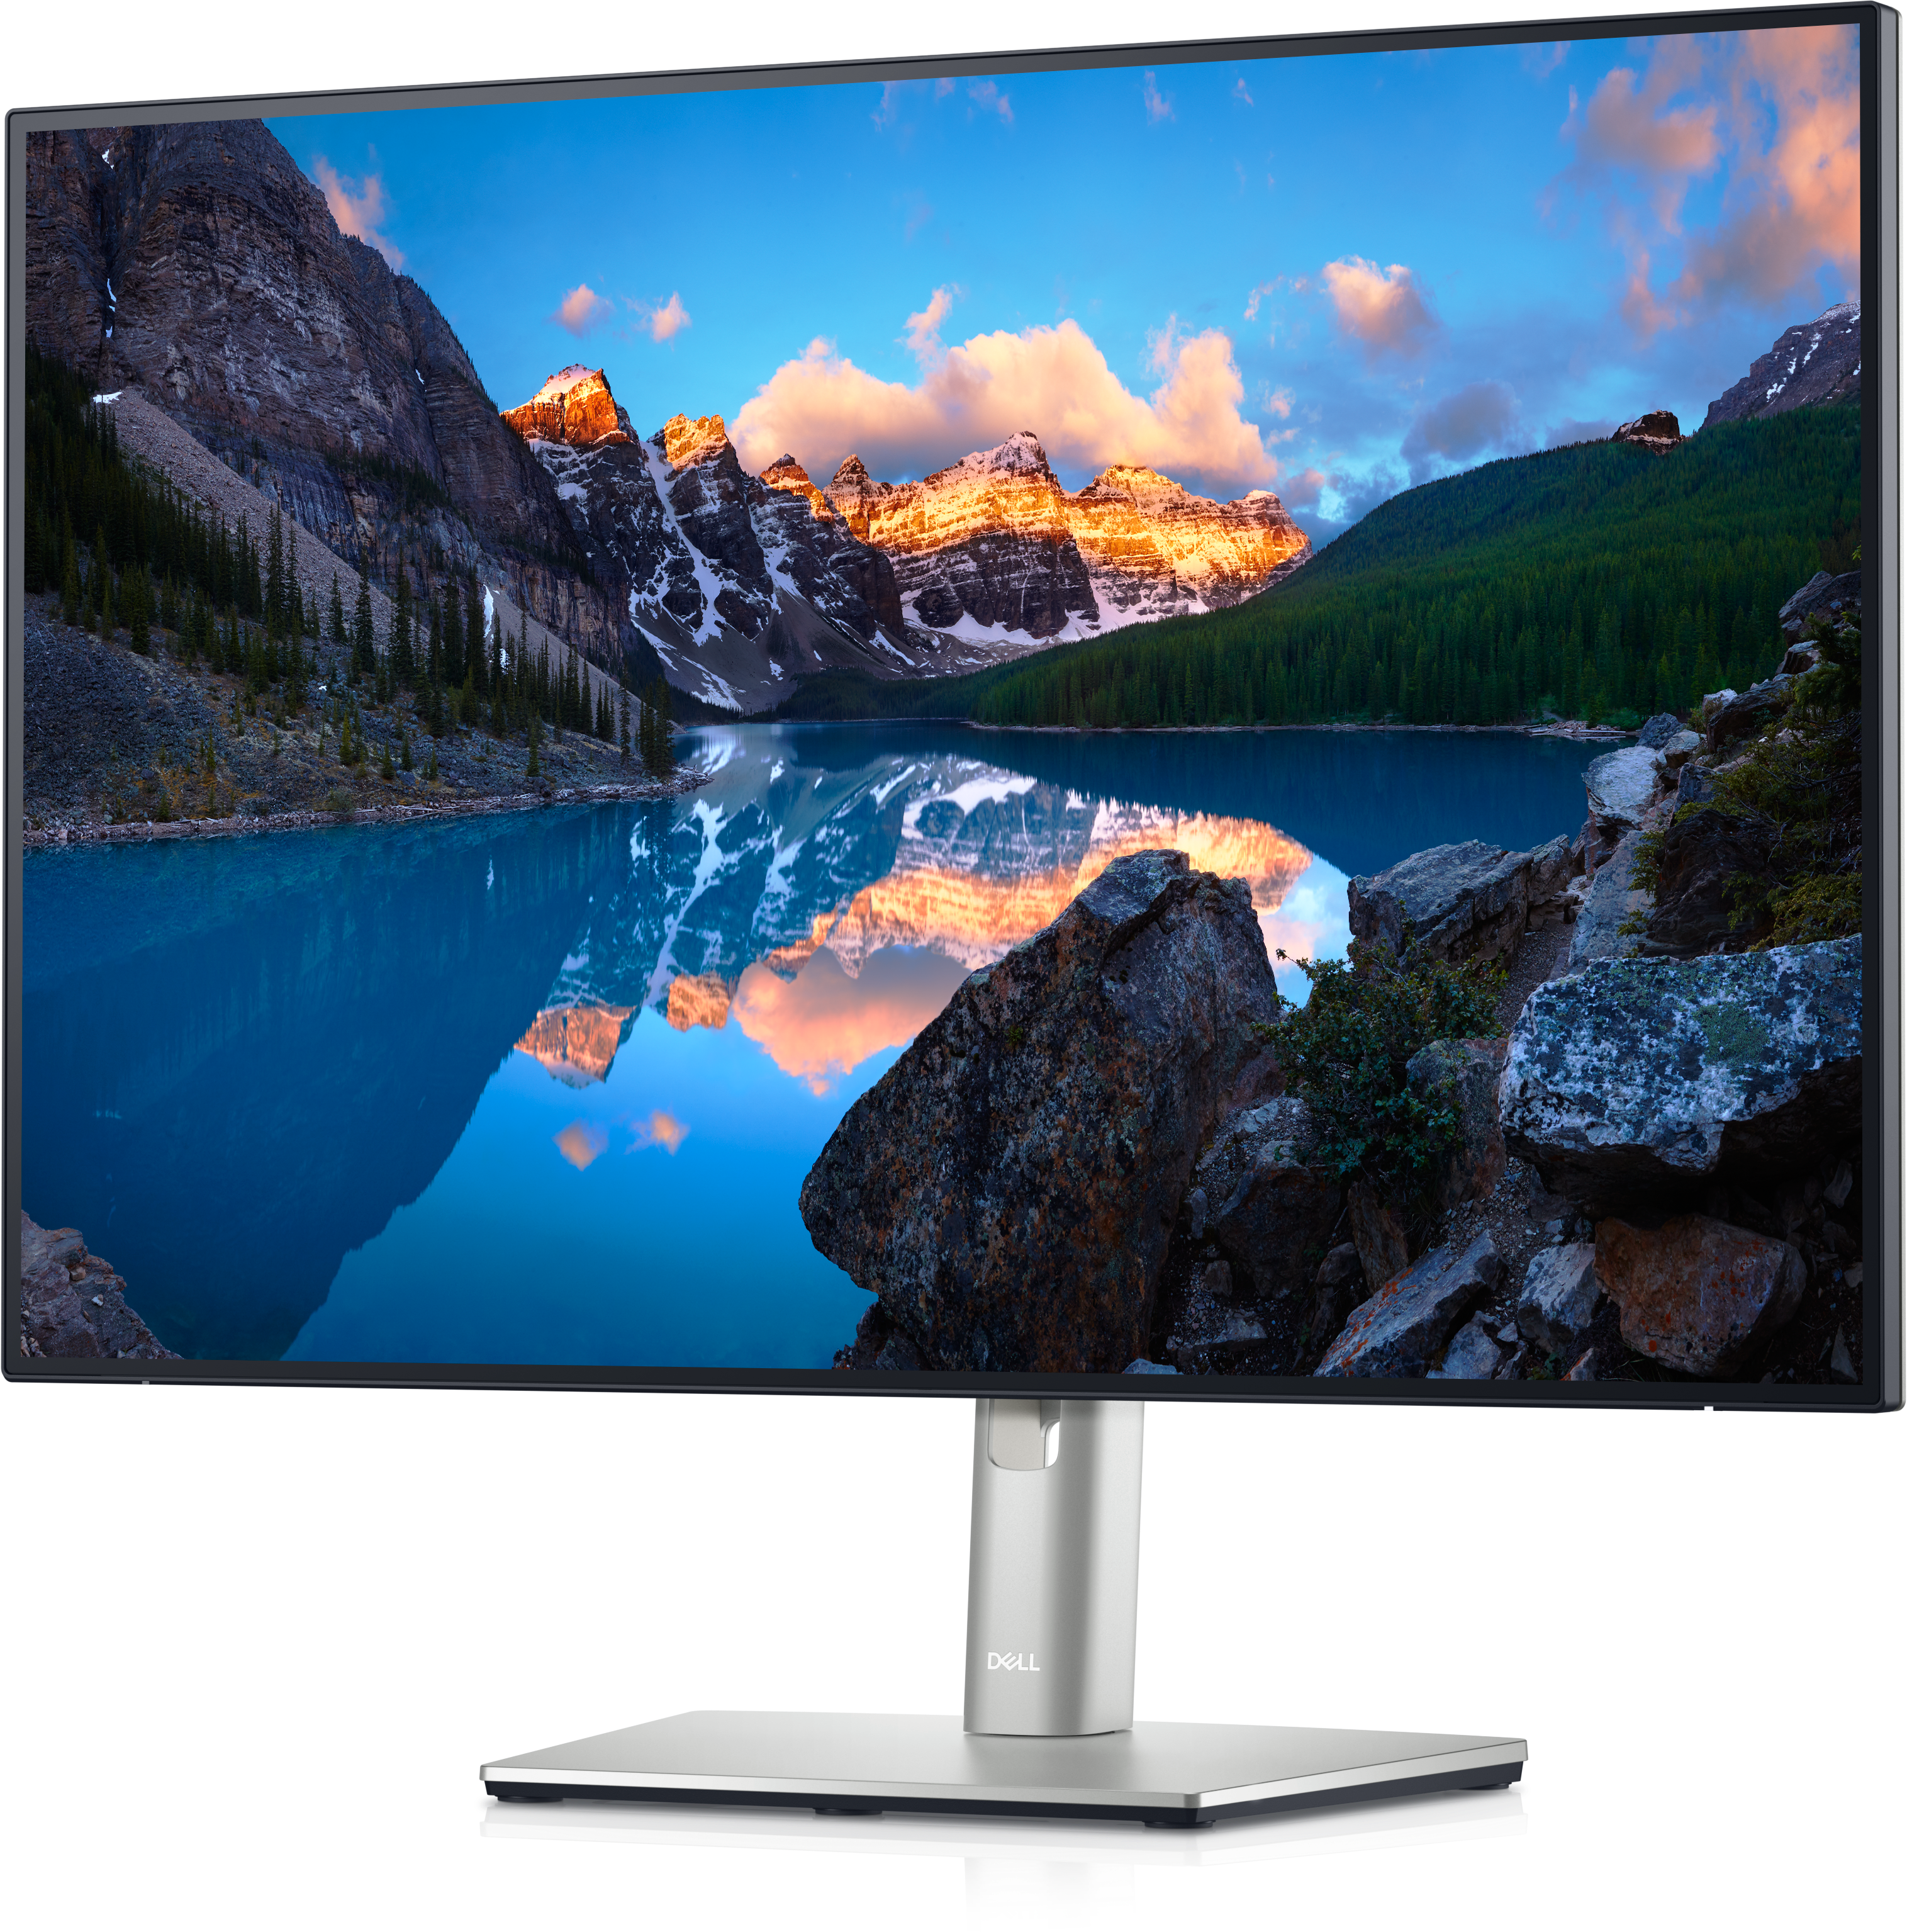 Dell 210-AXMB, 61.13 Cm (24.1), WUXGA 1920 X 1200 Bei 60 Hz, 350 Cd/m², 8 Ms (normal); 5 Ms (schnell)